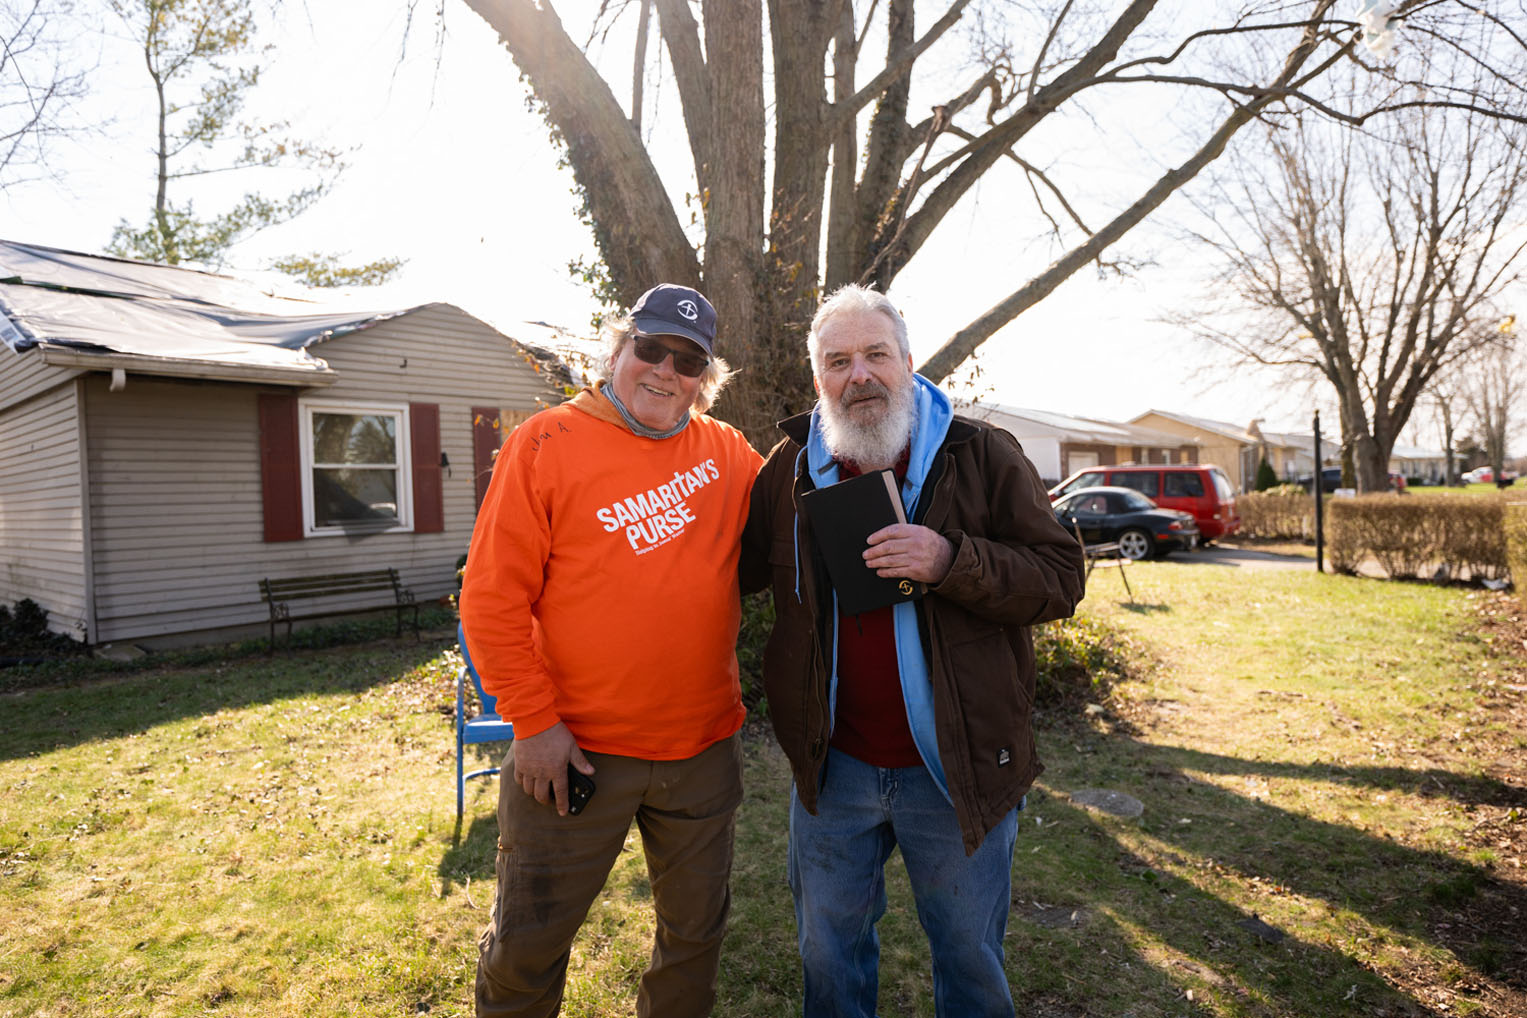 Volunteer James Azure struck up a friendship with Steve as our teams worked on his house. Through our work, friendship, and the Word of God given to him in a Billy Graham Study Bible, God has opened Steve's eyes to his great need for Jesus Christ in his life.